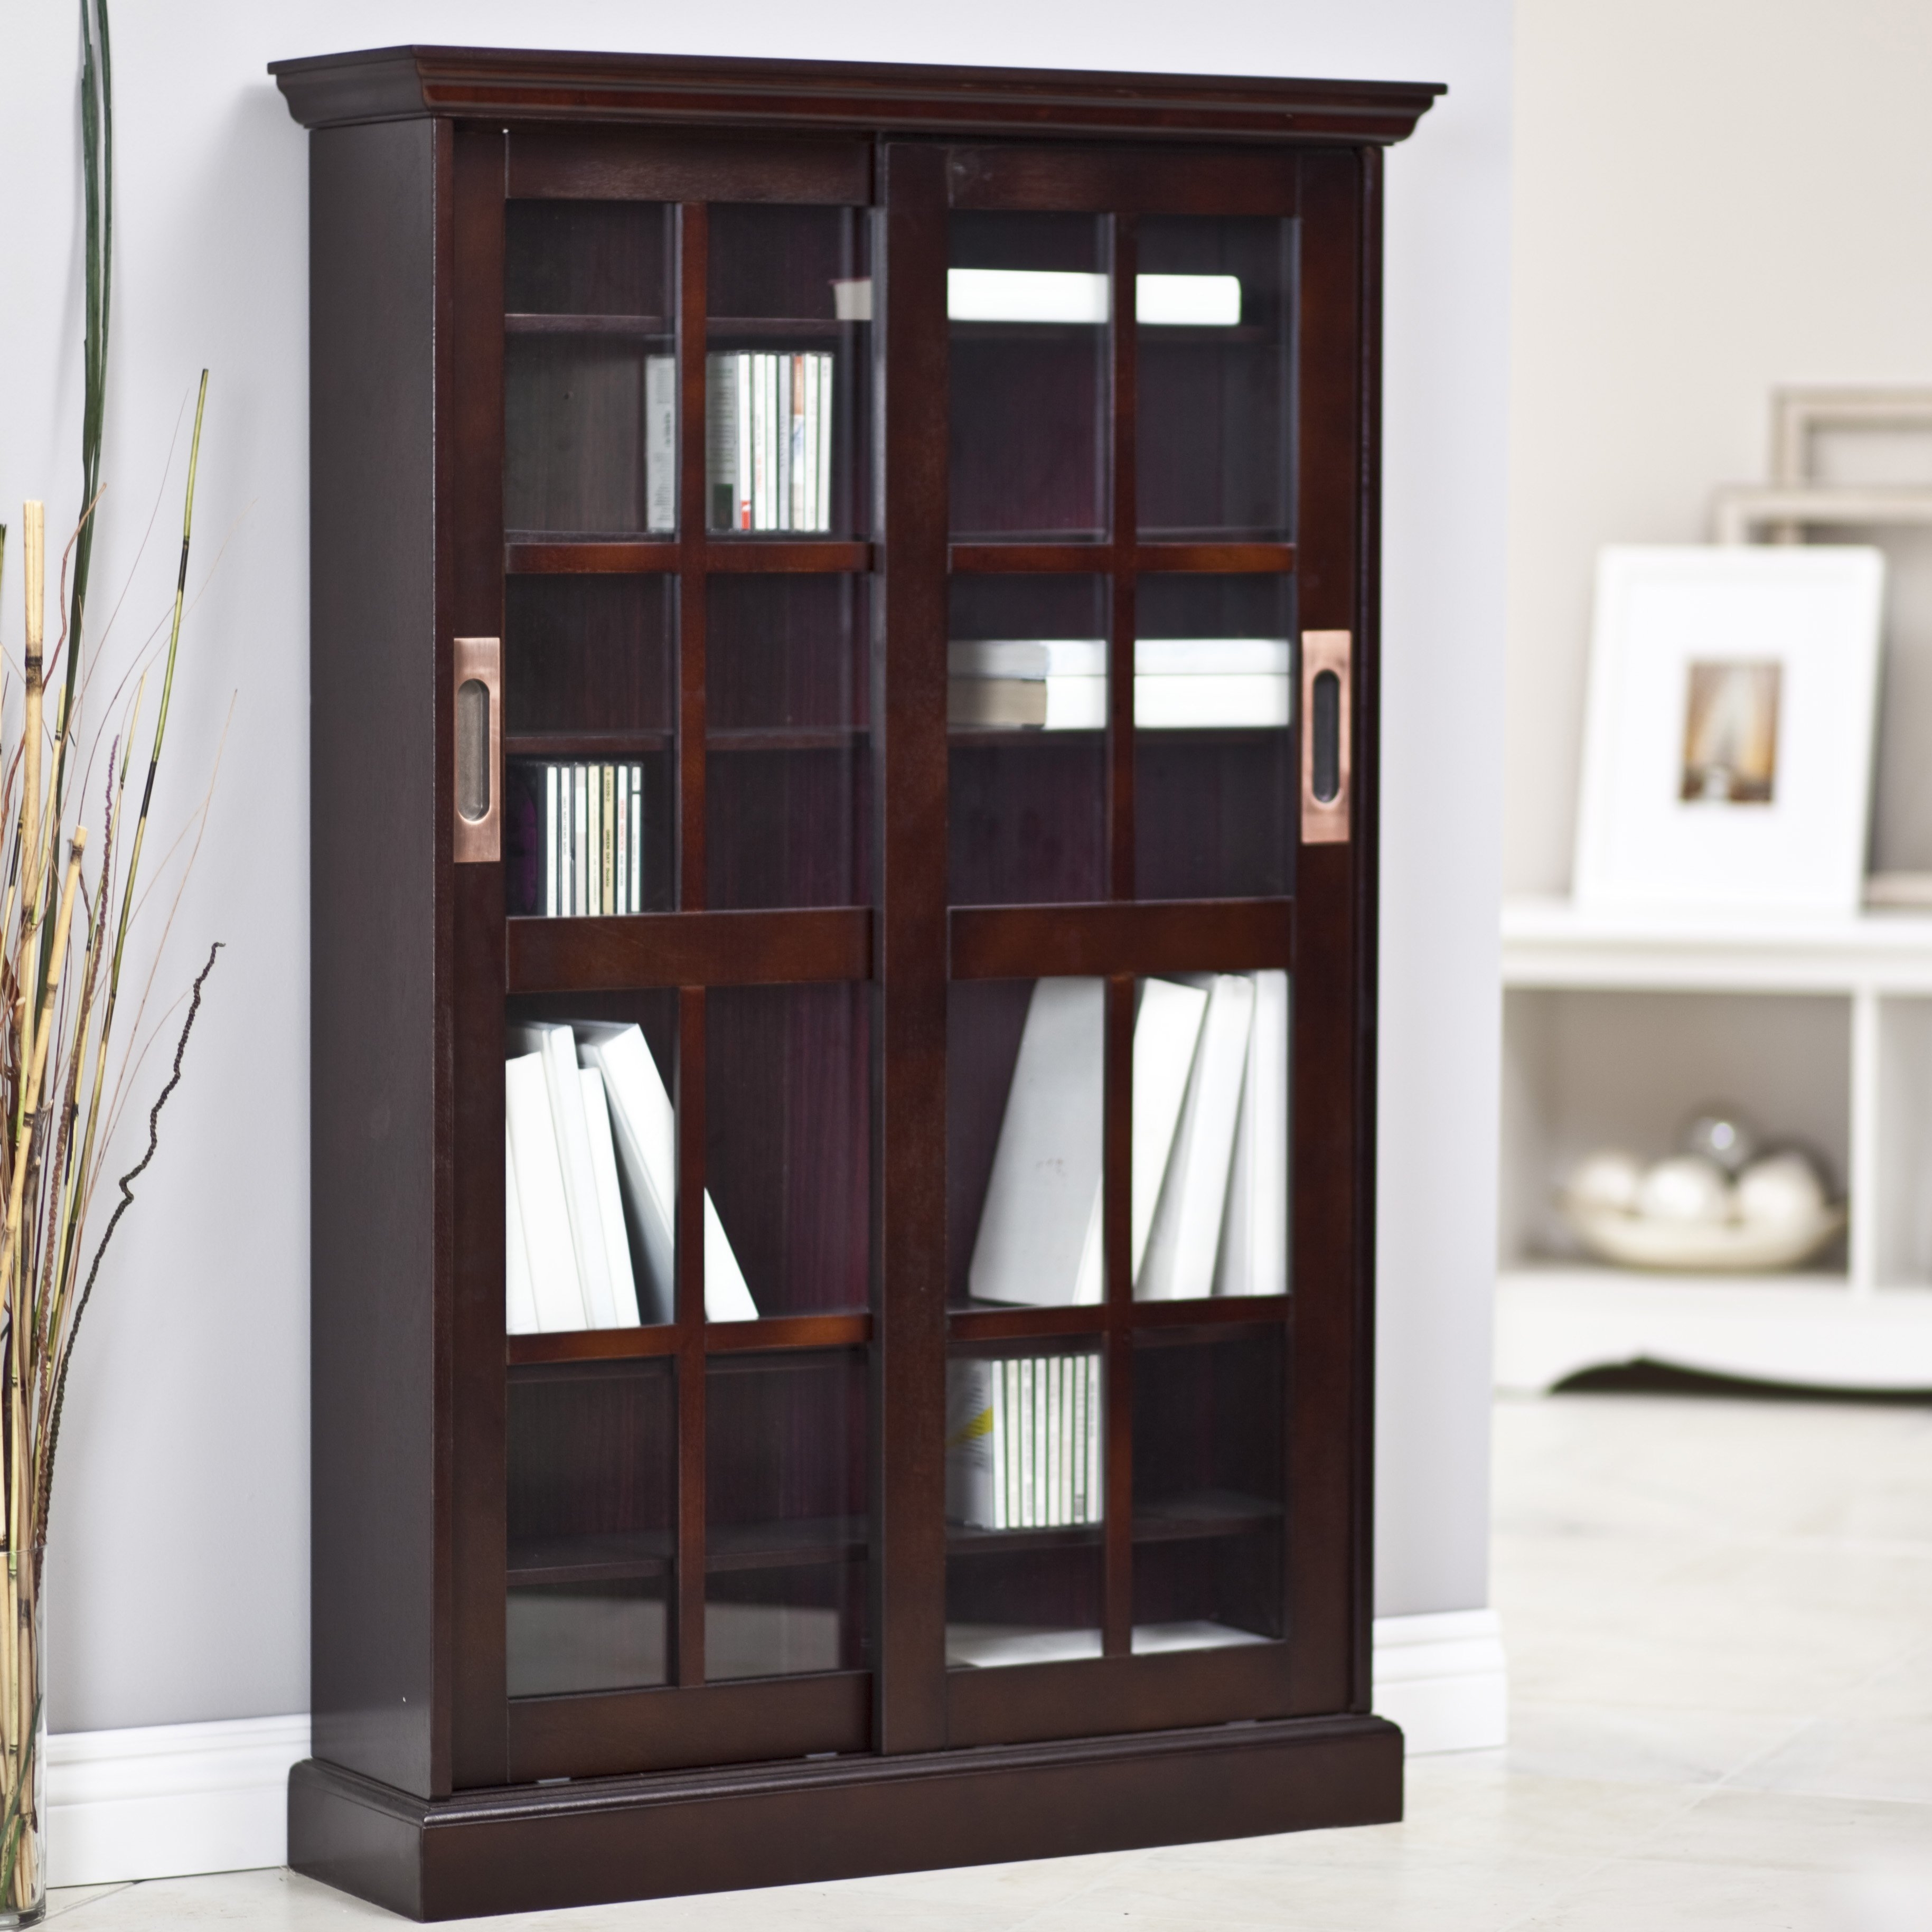 Media Cabinet With Sliding Glass Doors, White Media Cabinet With Sliding Glass Doors